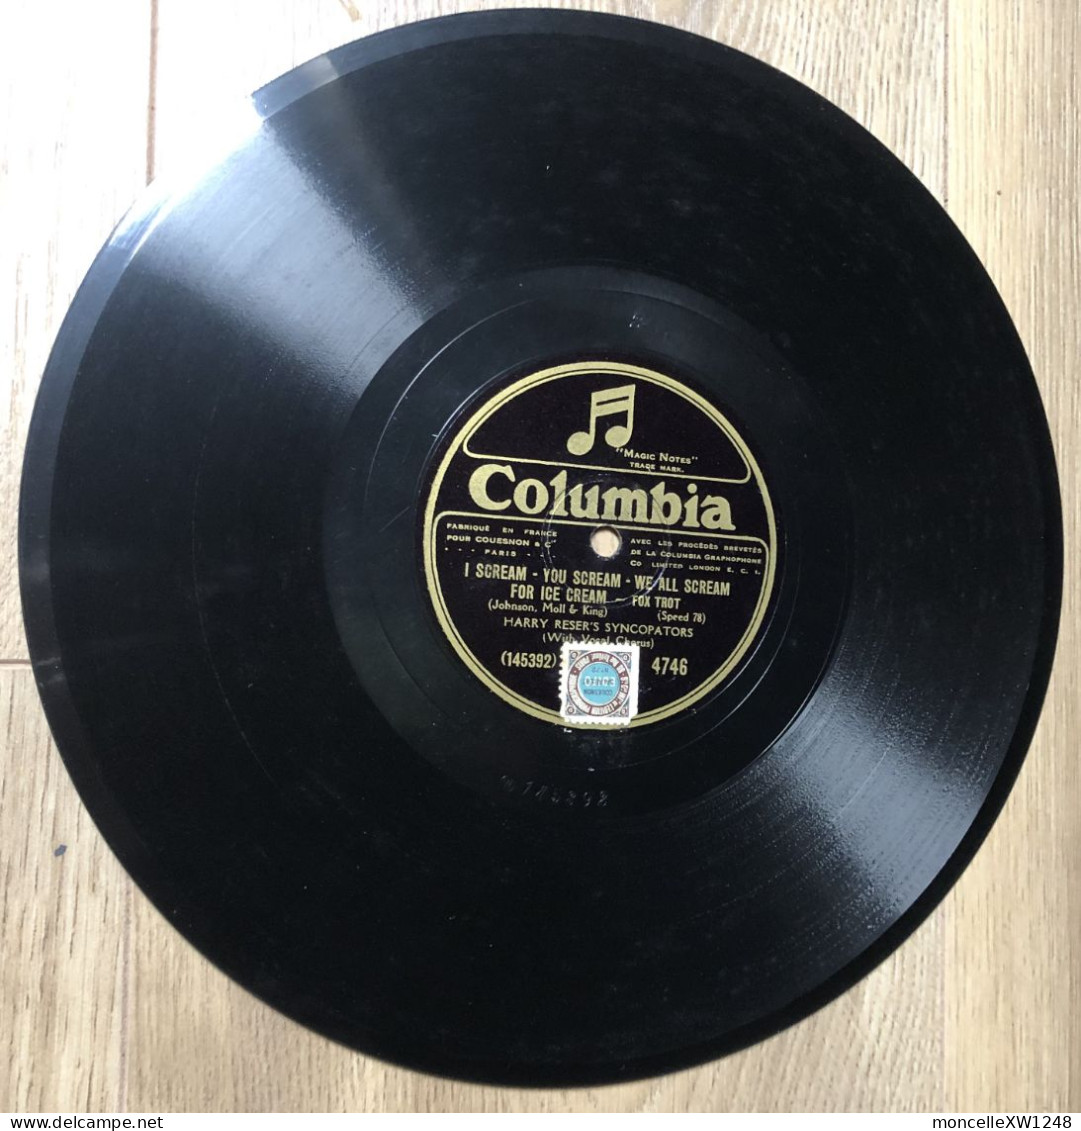 Harry Reser's Syncopators - 78 T When The Robert E. Lee Comes To Town (1928) - 78 Rpm - Schellackplatten